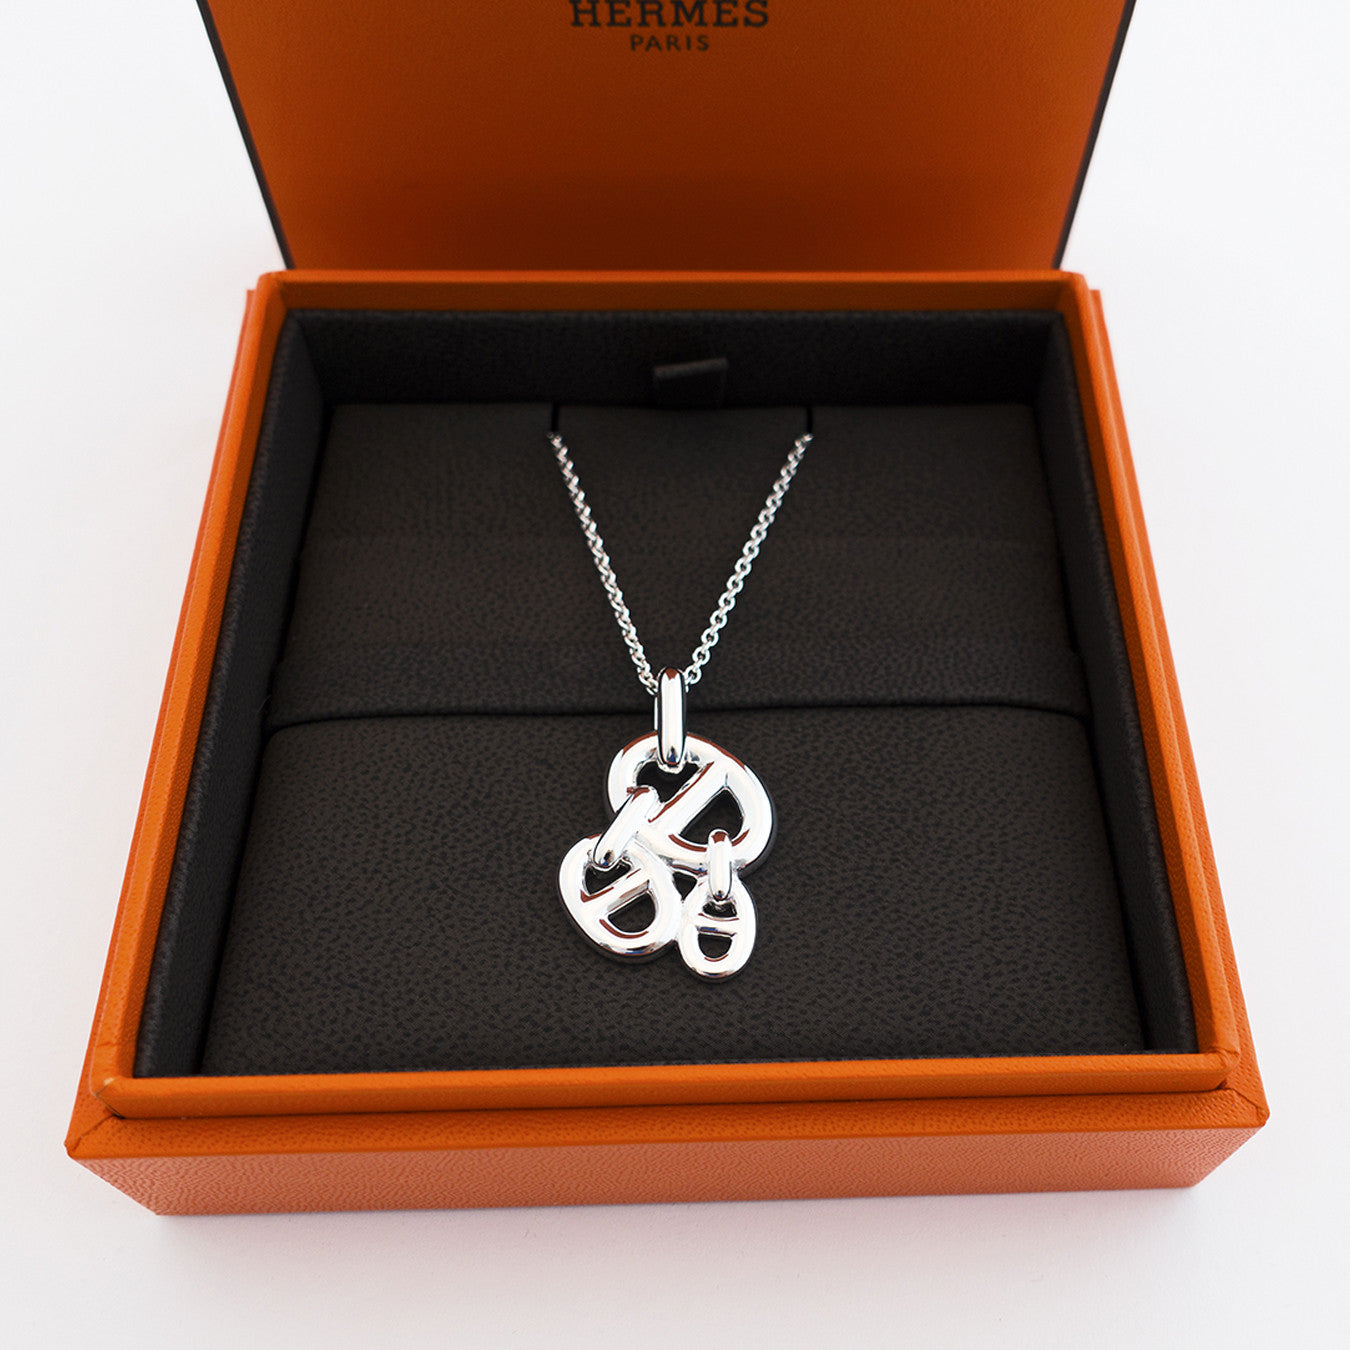 Hermes Chaine d'Ancre Enchainee Silver Pendant Necklace Perfect Gift